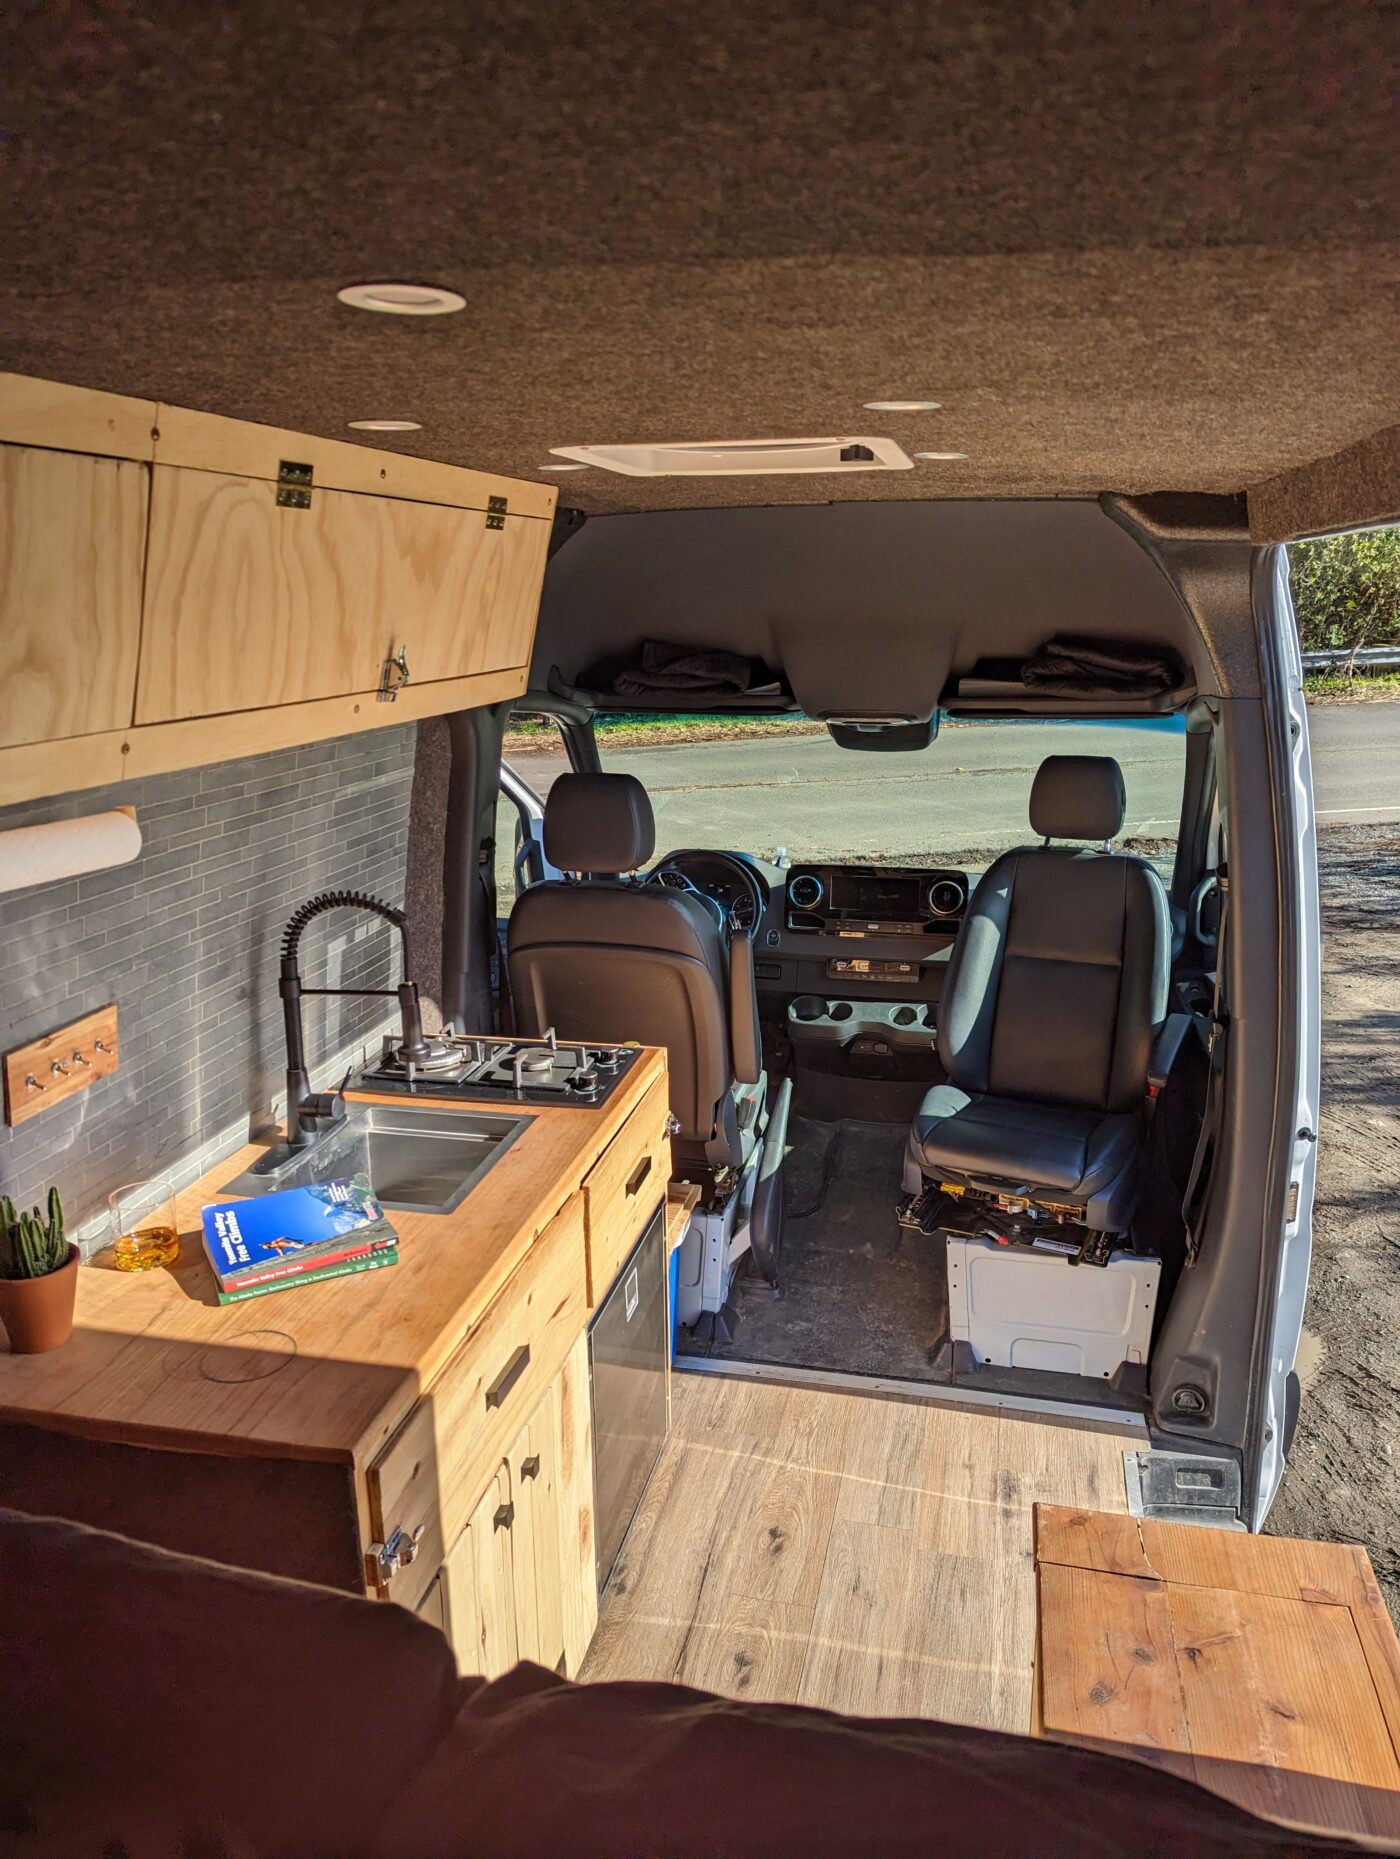 2019 Chevy Express For Sale In Oakland - Van Viewer